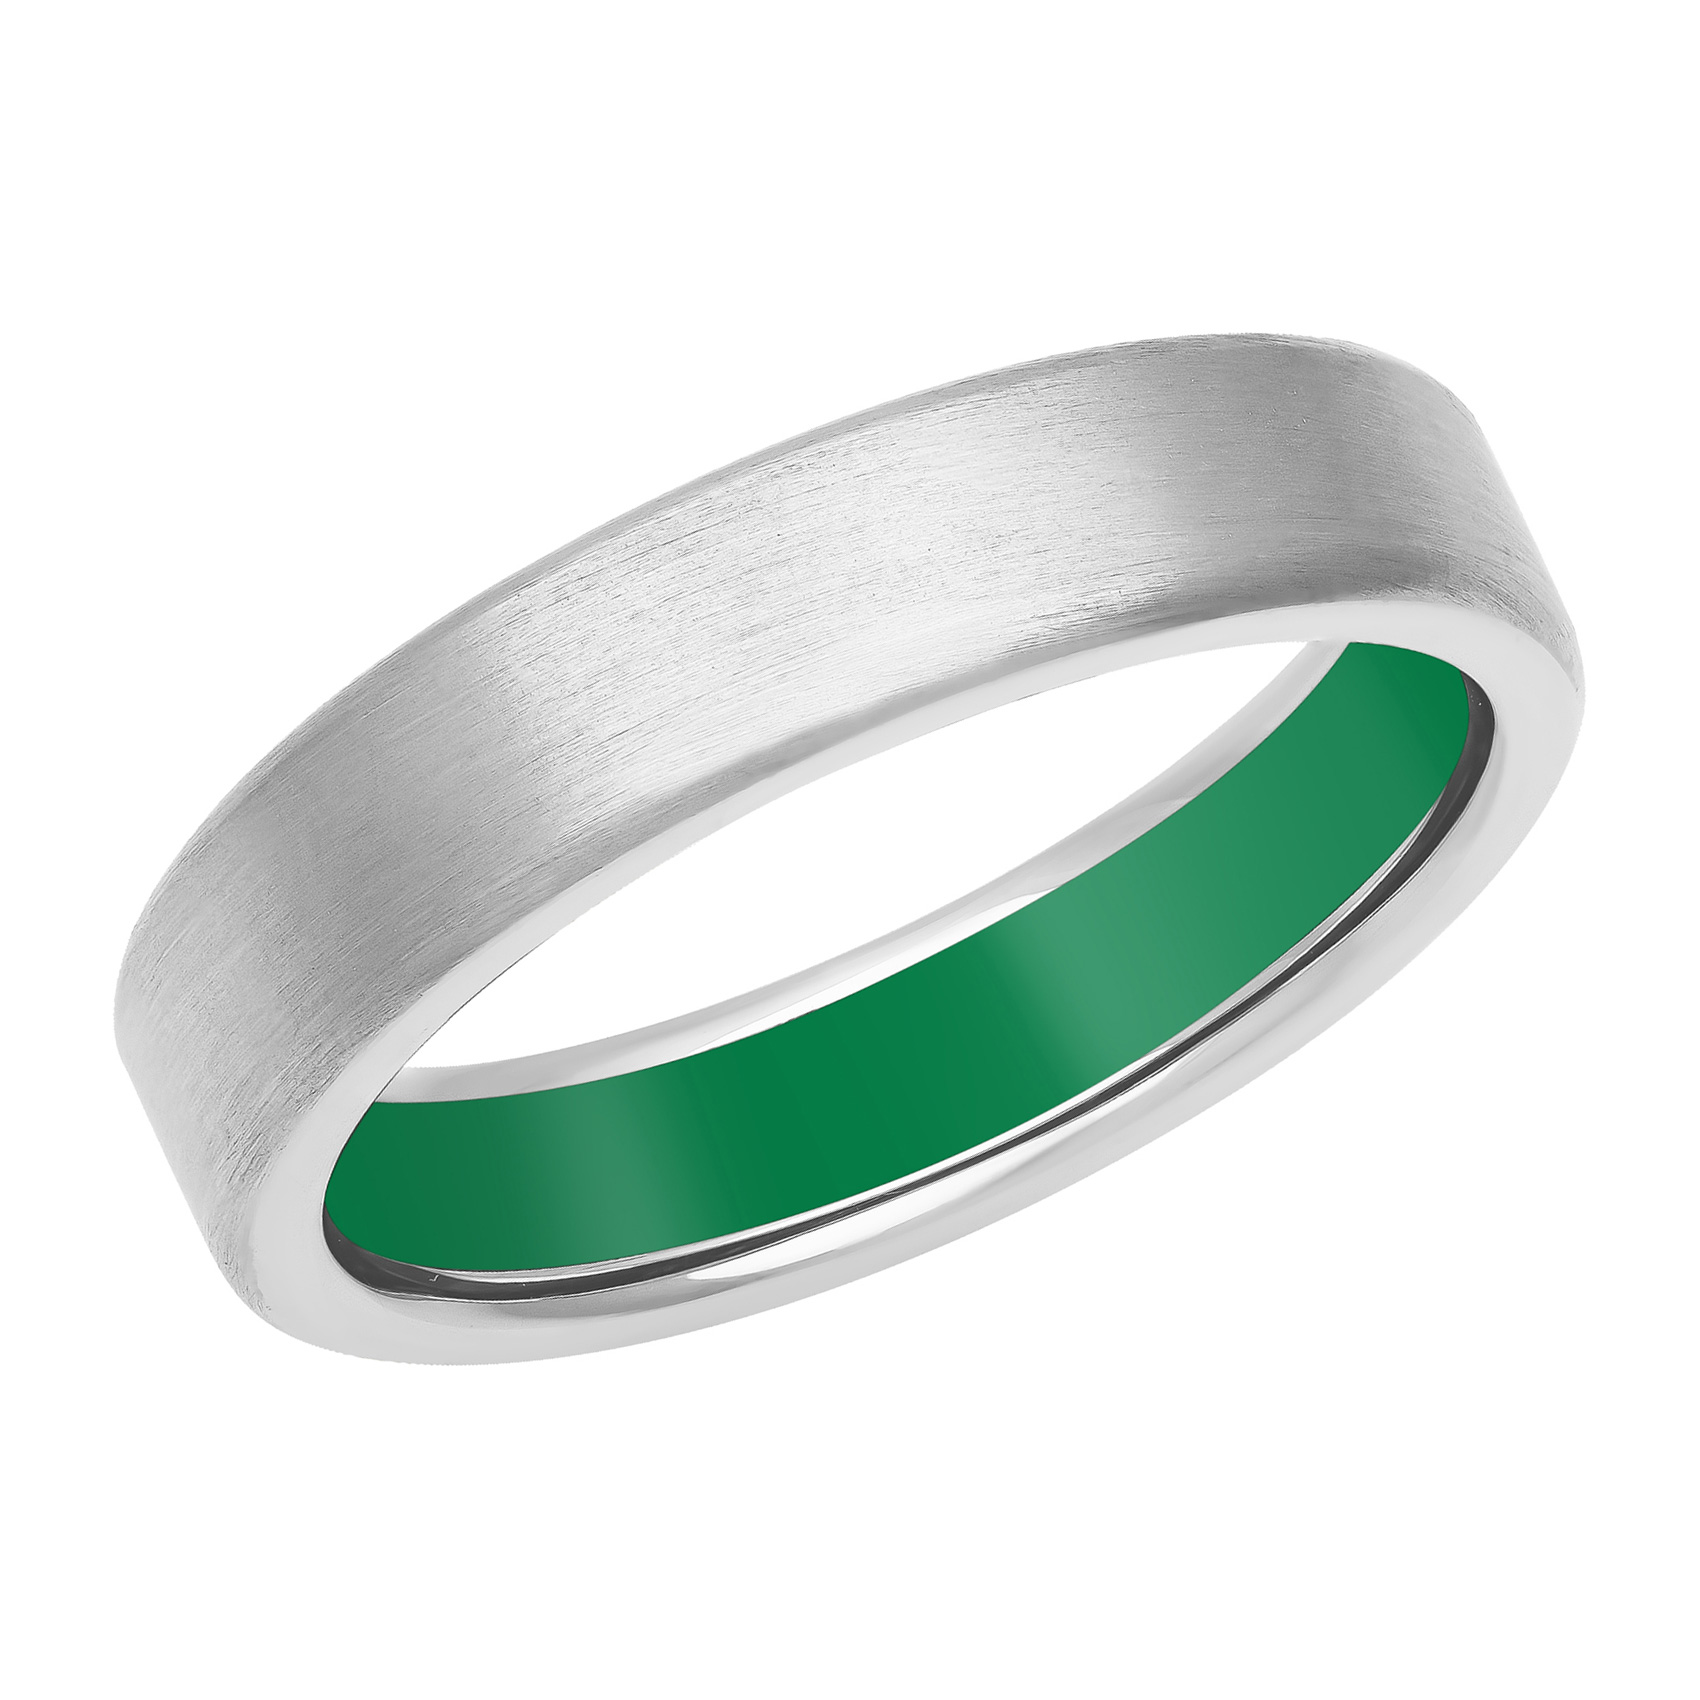 White Gold with Green Ceramic Interior Wedding Band | 5mm | Men's | Size 9.5